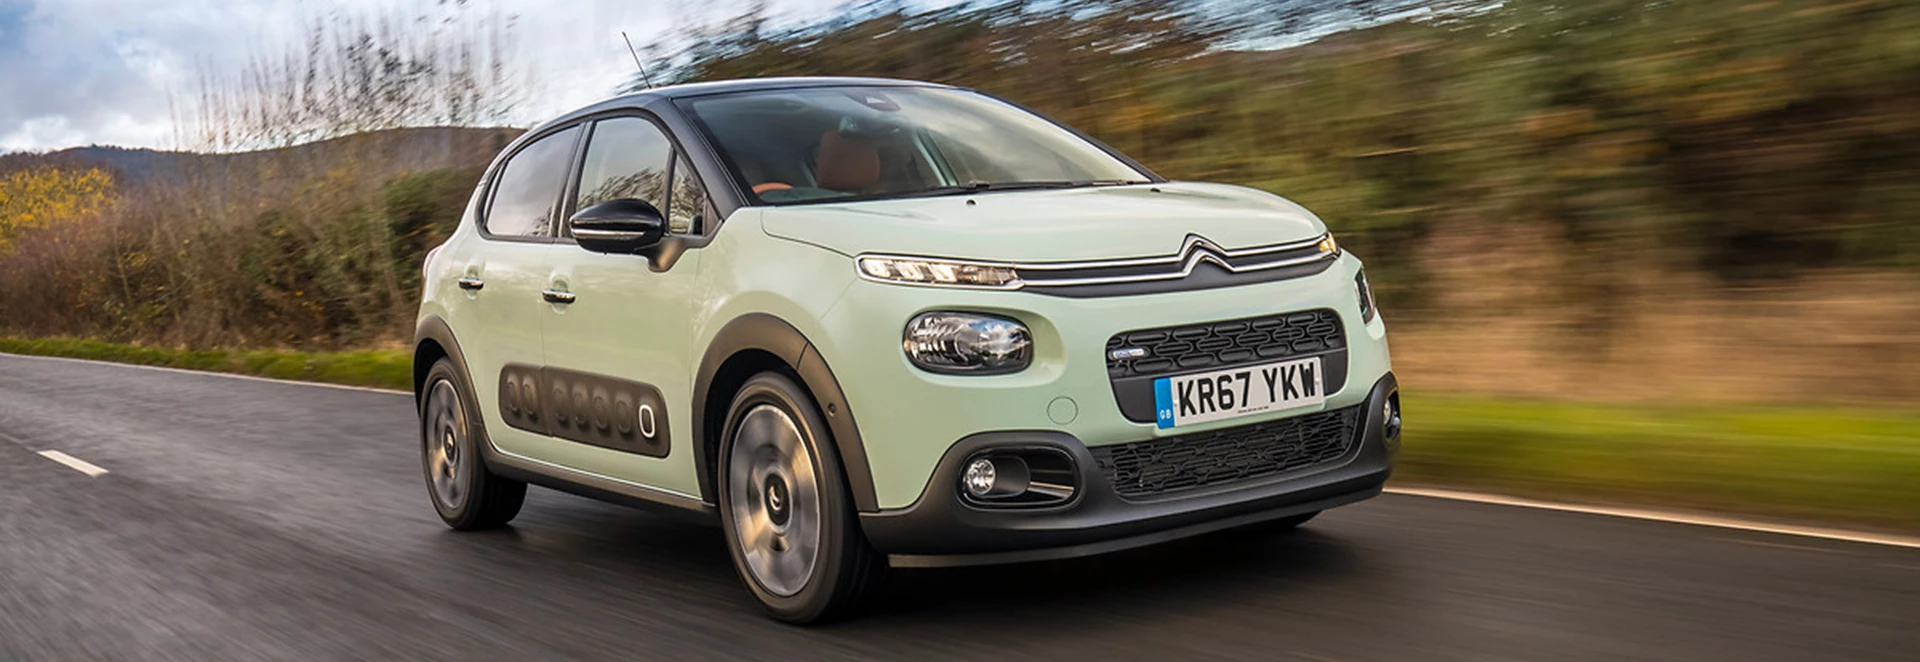 Best small family cars in 2019 